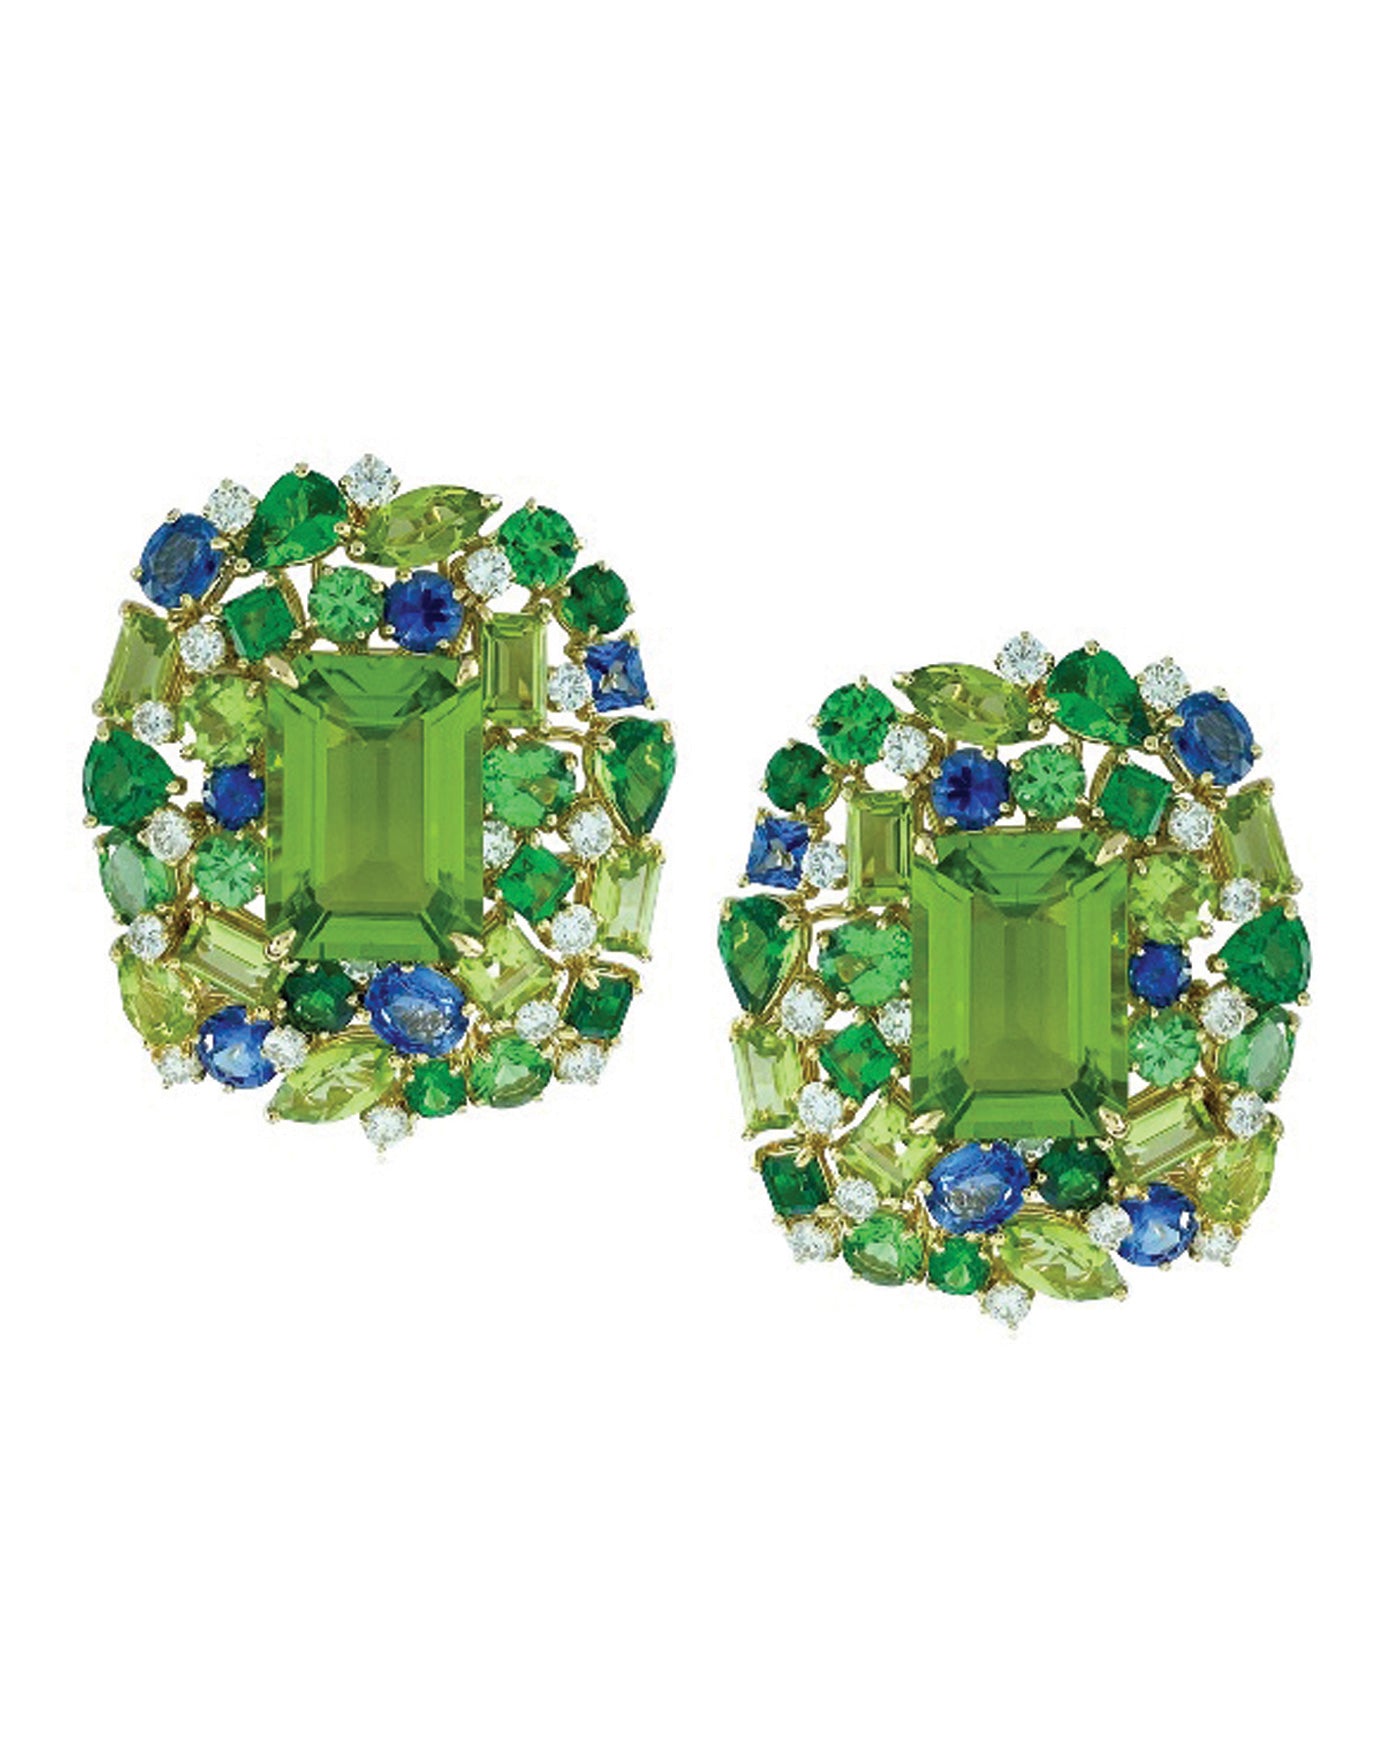 Peridot button earrings enhanced with diamonds and a myriad of gemstones, crafted in 18 karat yellow gold